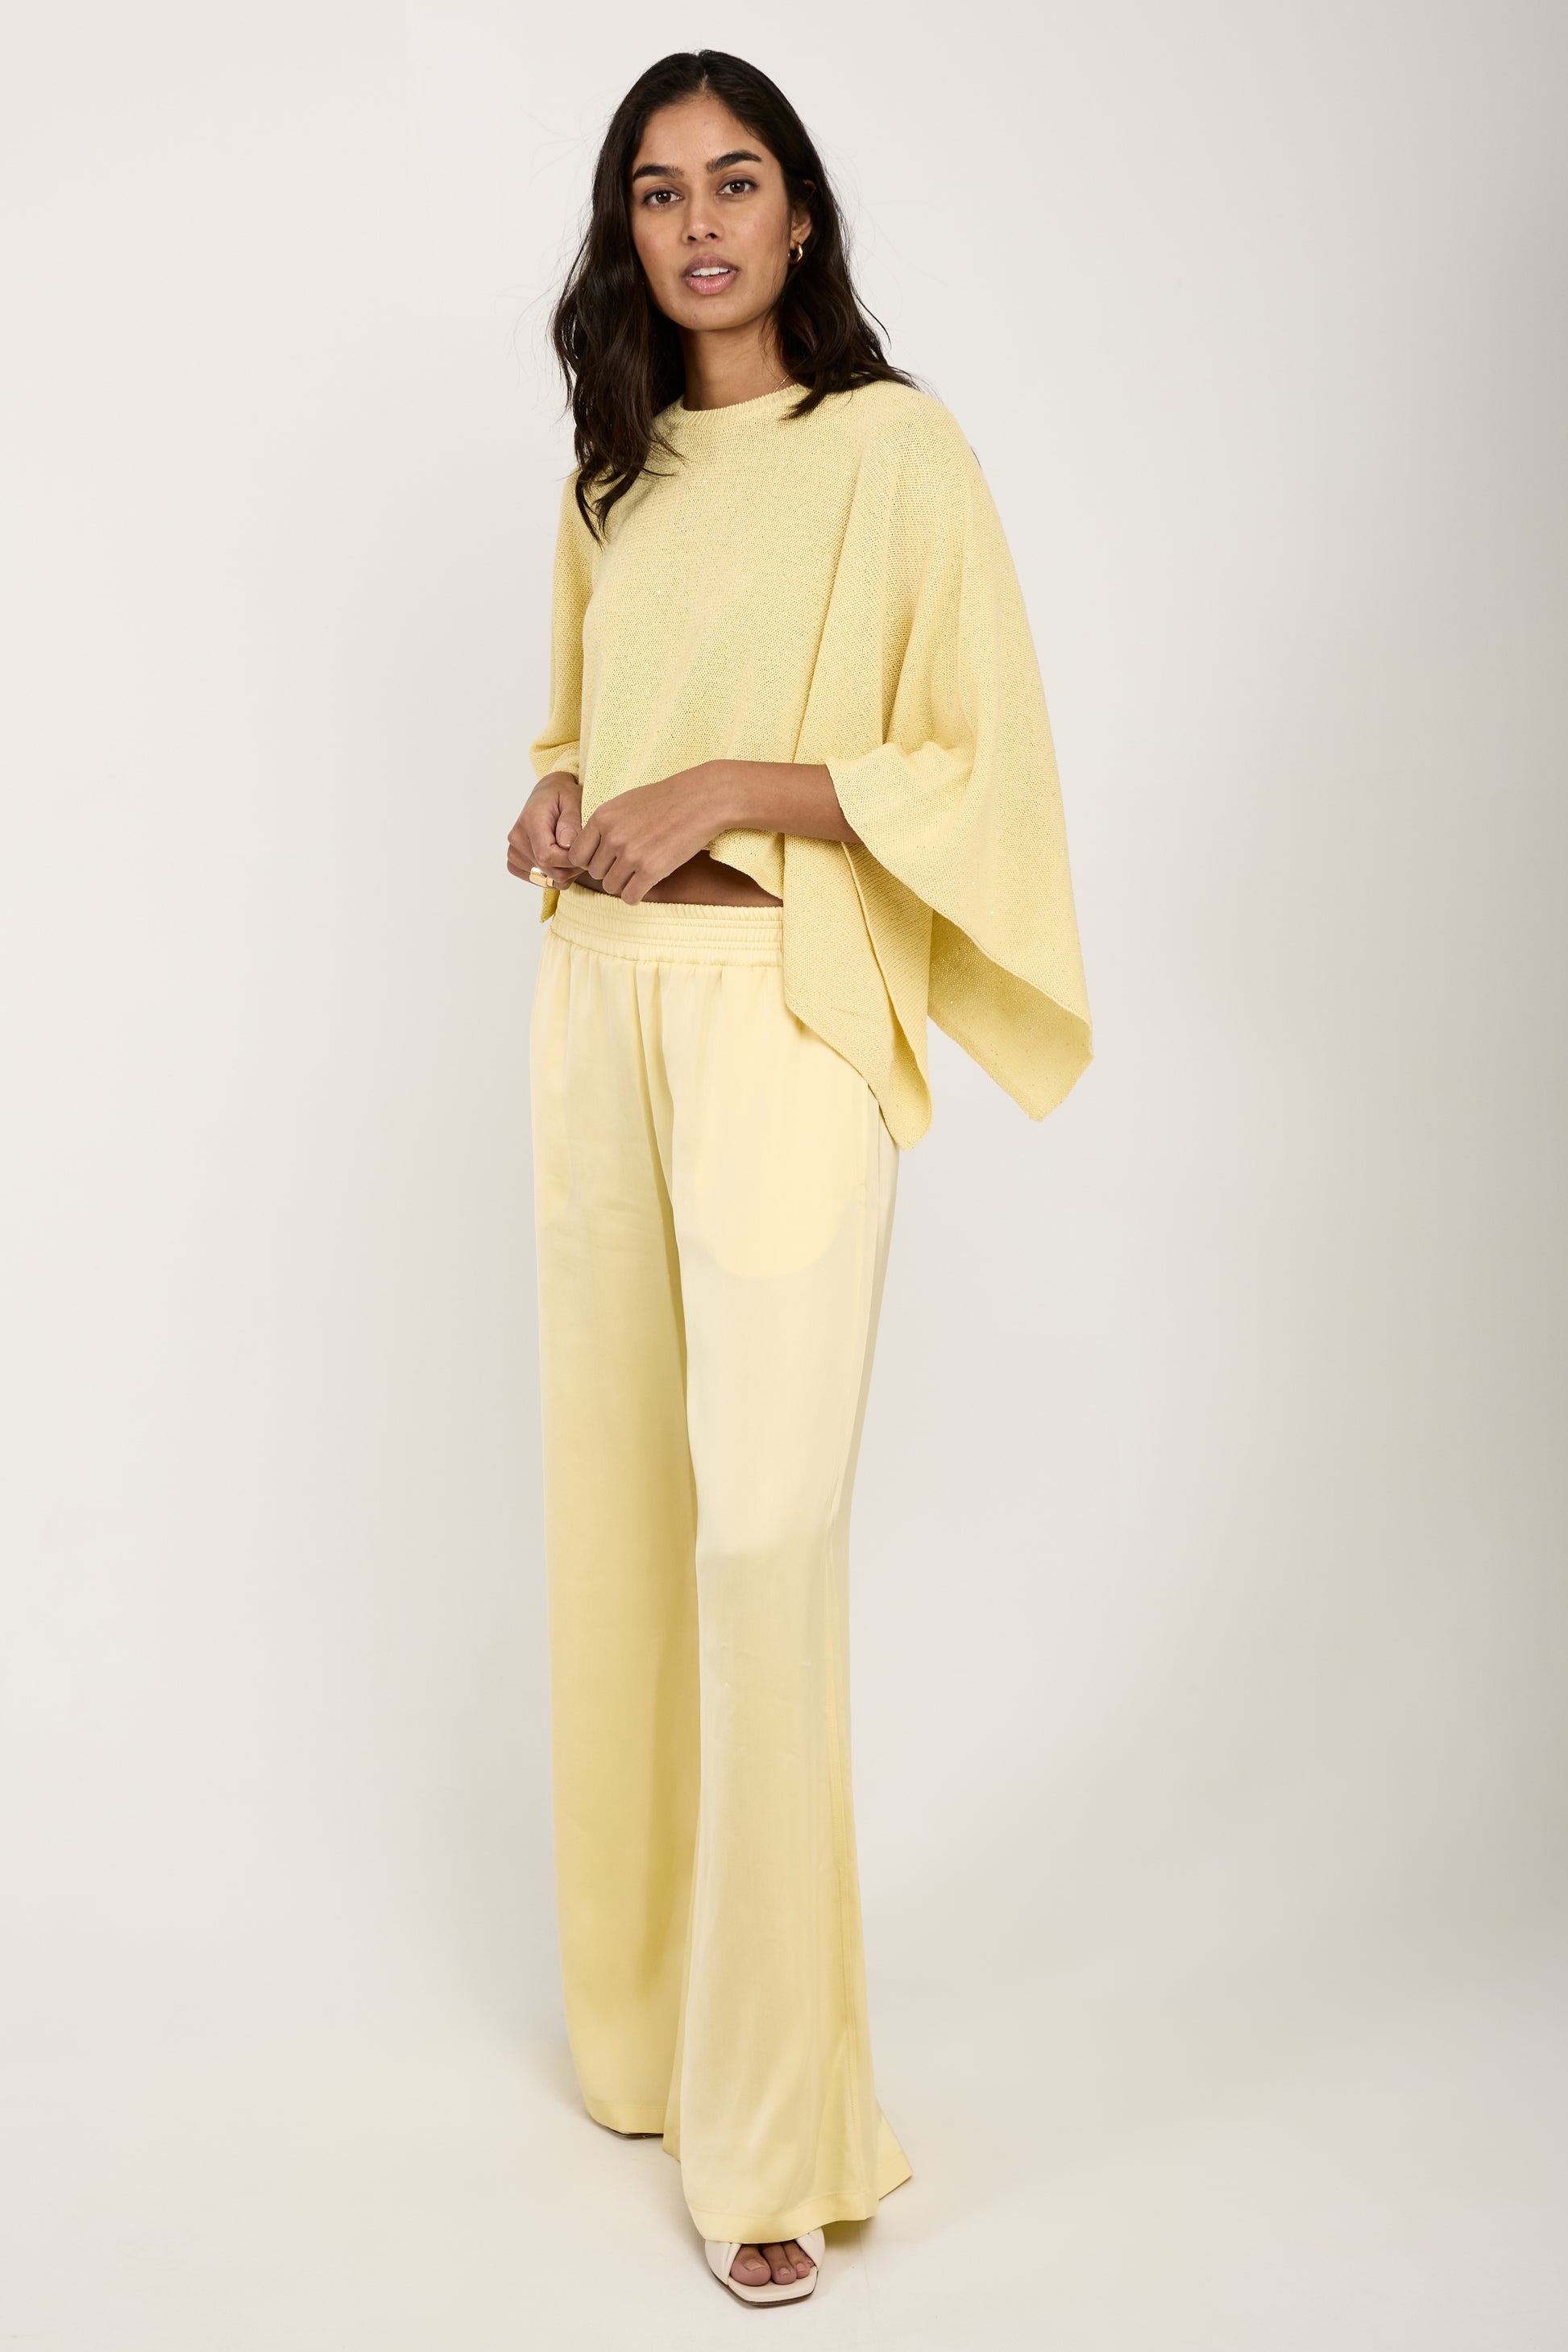 FABIANA FILIPPI Cotton Linen Cape Sweater with Sequins in Yellow